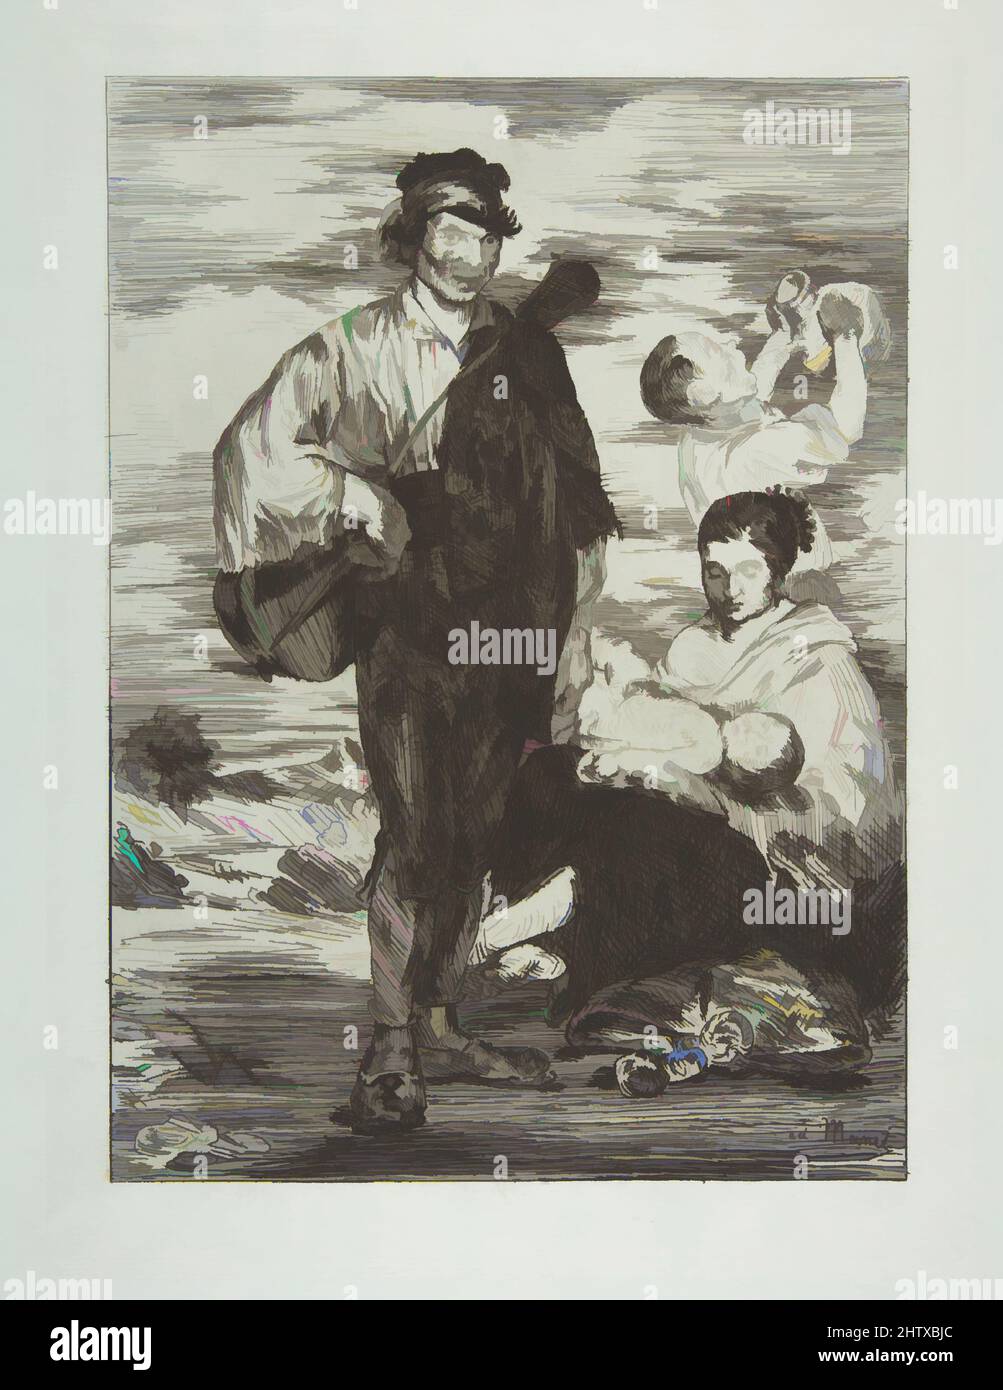 Art inspired by The Gypsies (Les Gitanos), 1862, etching, final state (II) on blue laid paper, plate: 12 x 9 3/8in. (30.5 x 23.8cm), Prints, Édouard Manet (French, Paris 1832–1883 Paris, Classic works modernized by Artotop with a splash of modernity. Shapes, color and value, eye-catching visual impact on art. Emotions through freedom of artworks in a contemporary way. A timeless message pursuing a wildly creative new direction. Artists turning to the digital medium and creating the Artotop NFT Stock Photo